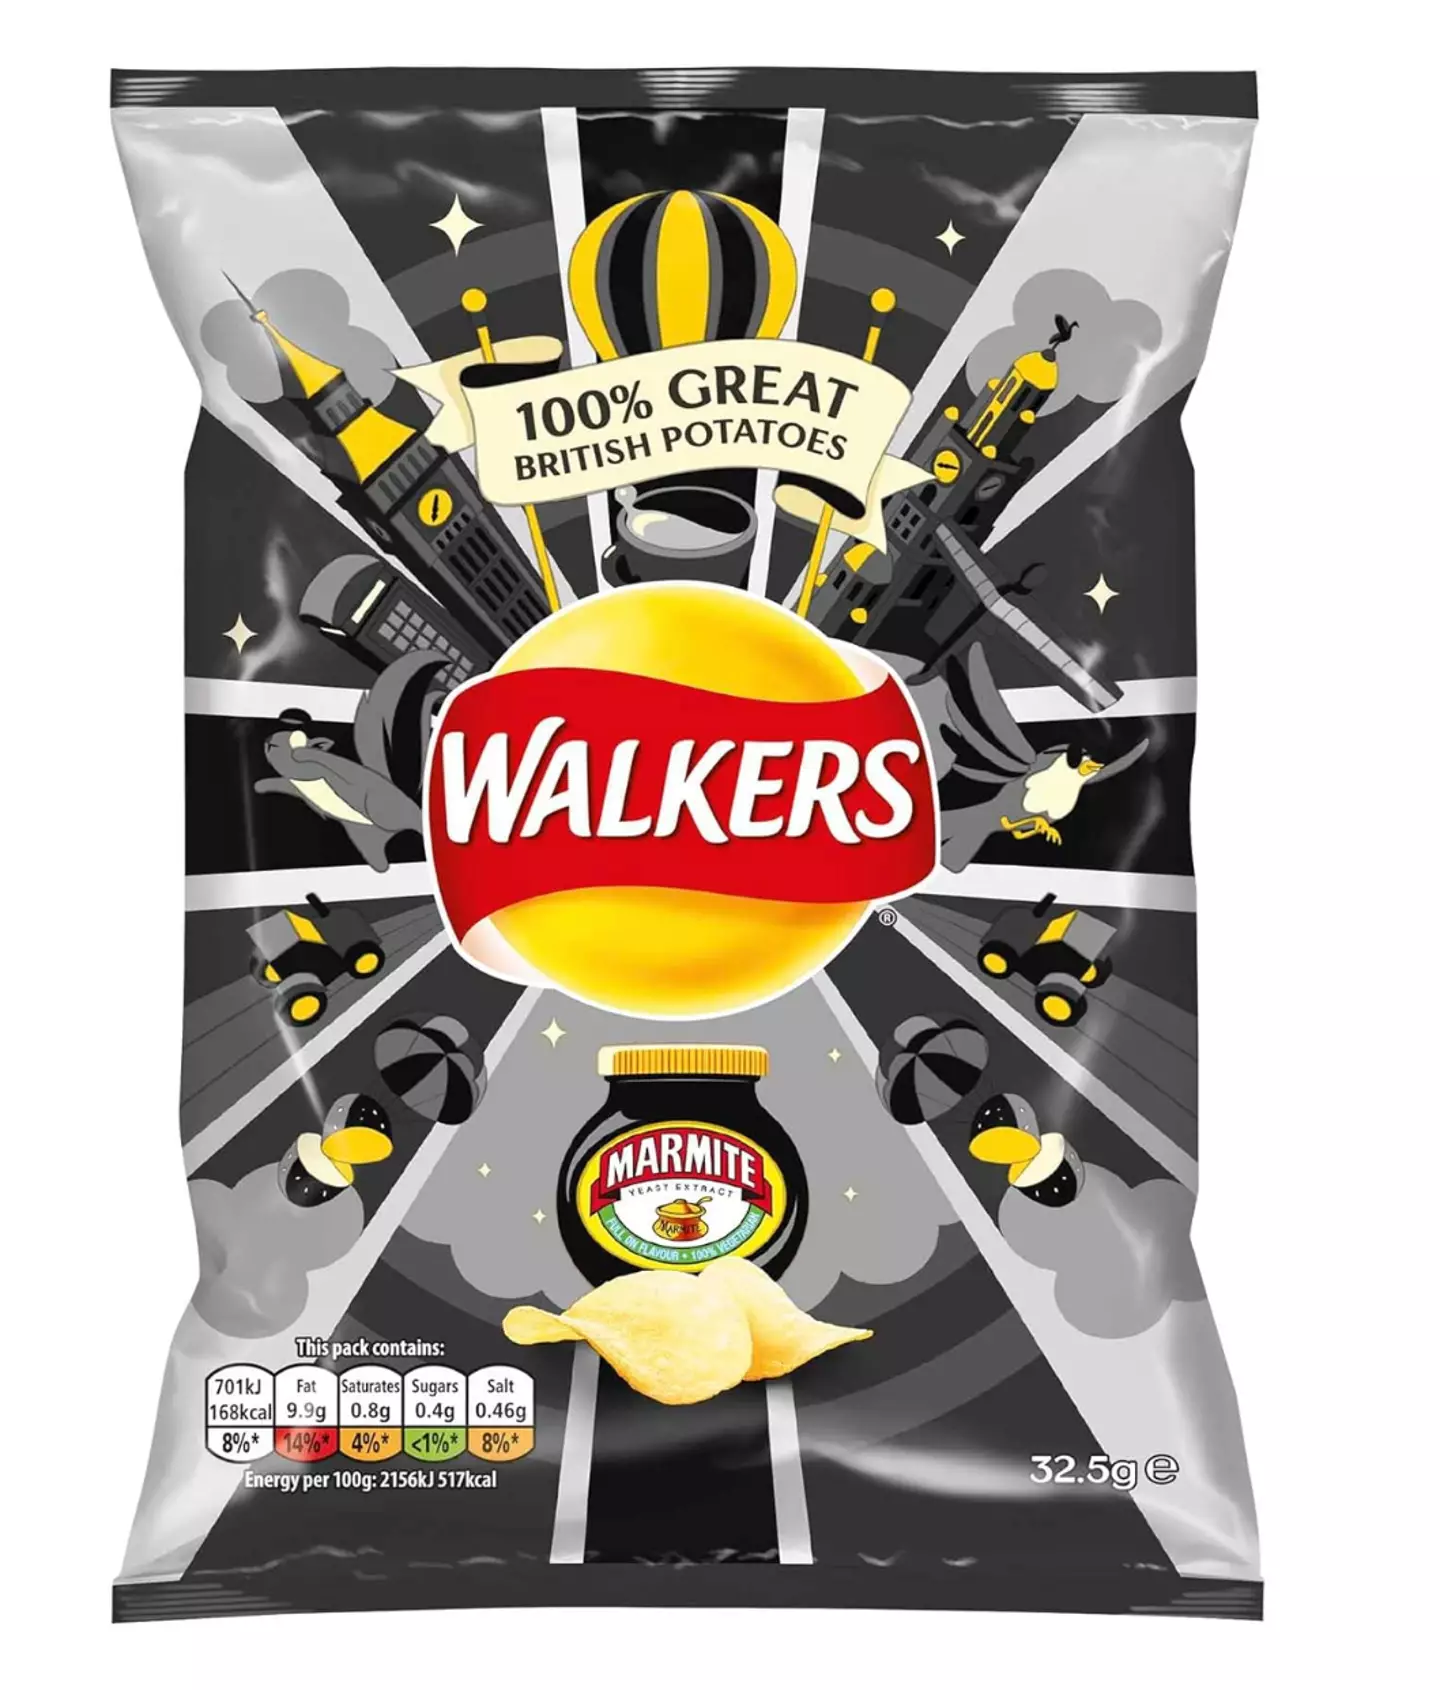 Say goodbye to marmite flavoured Walkers!